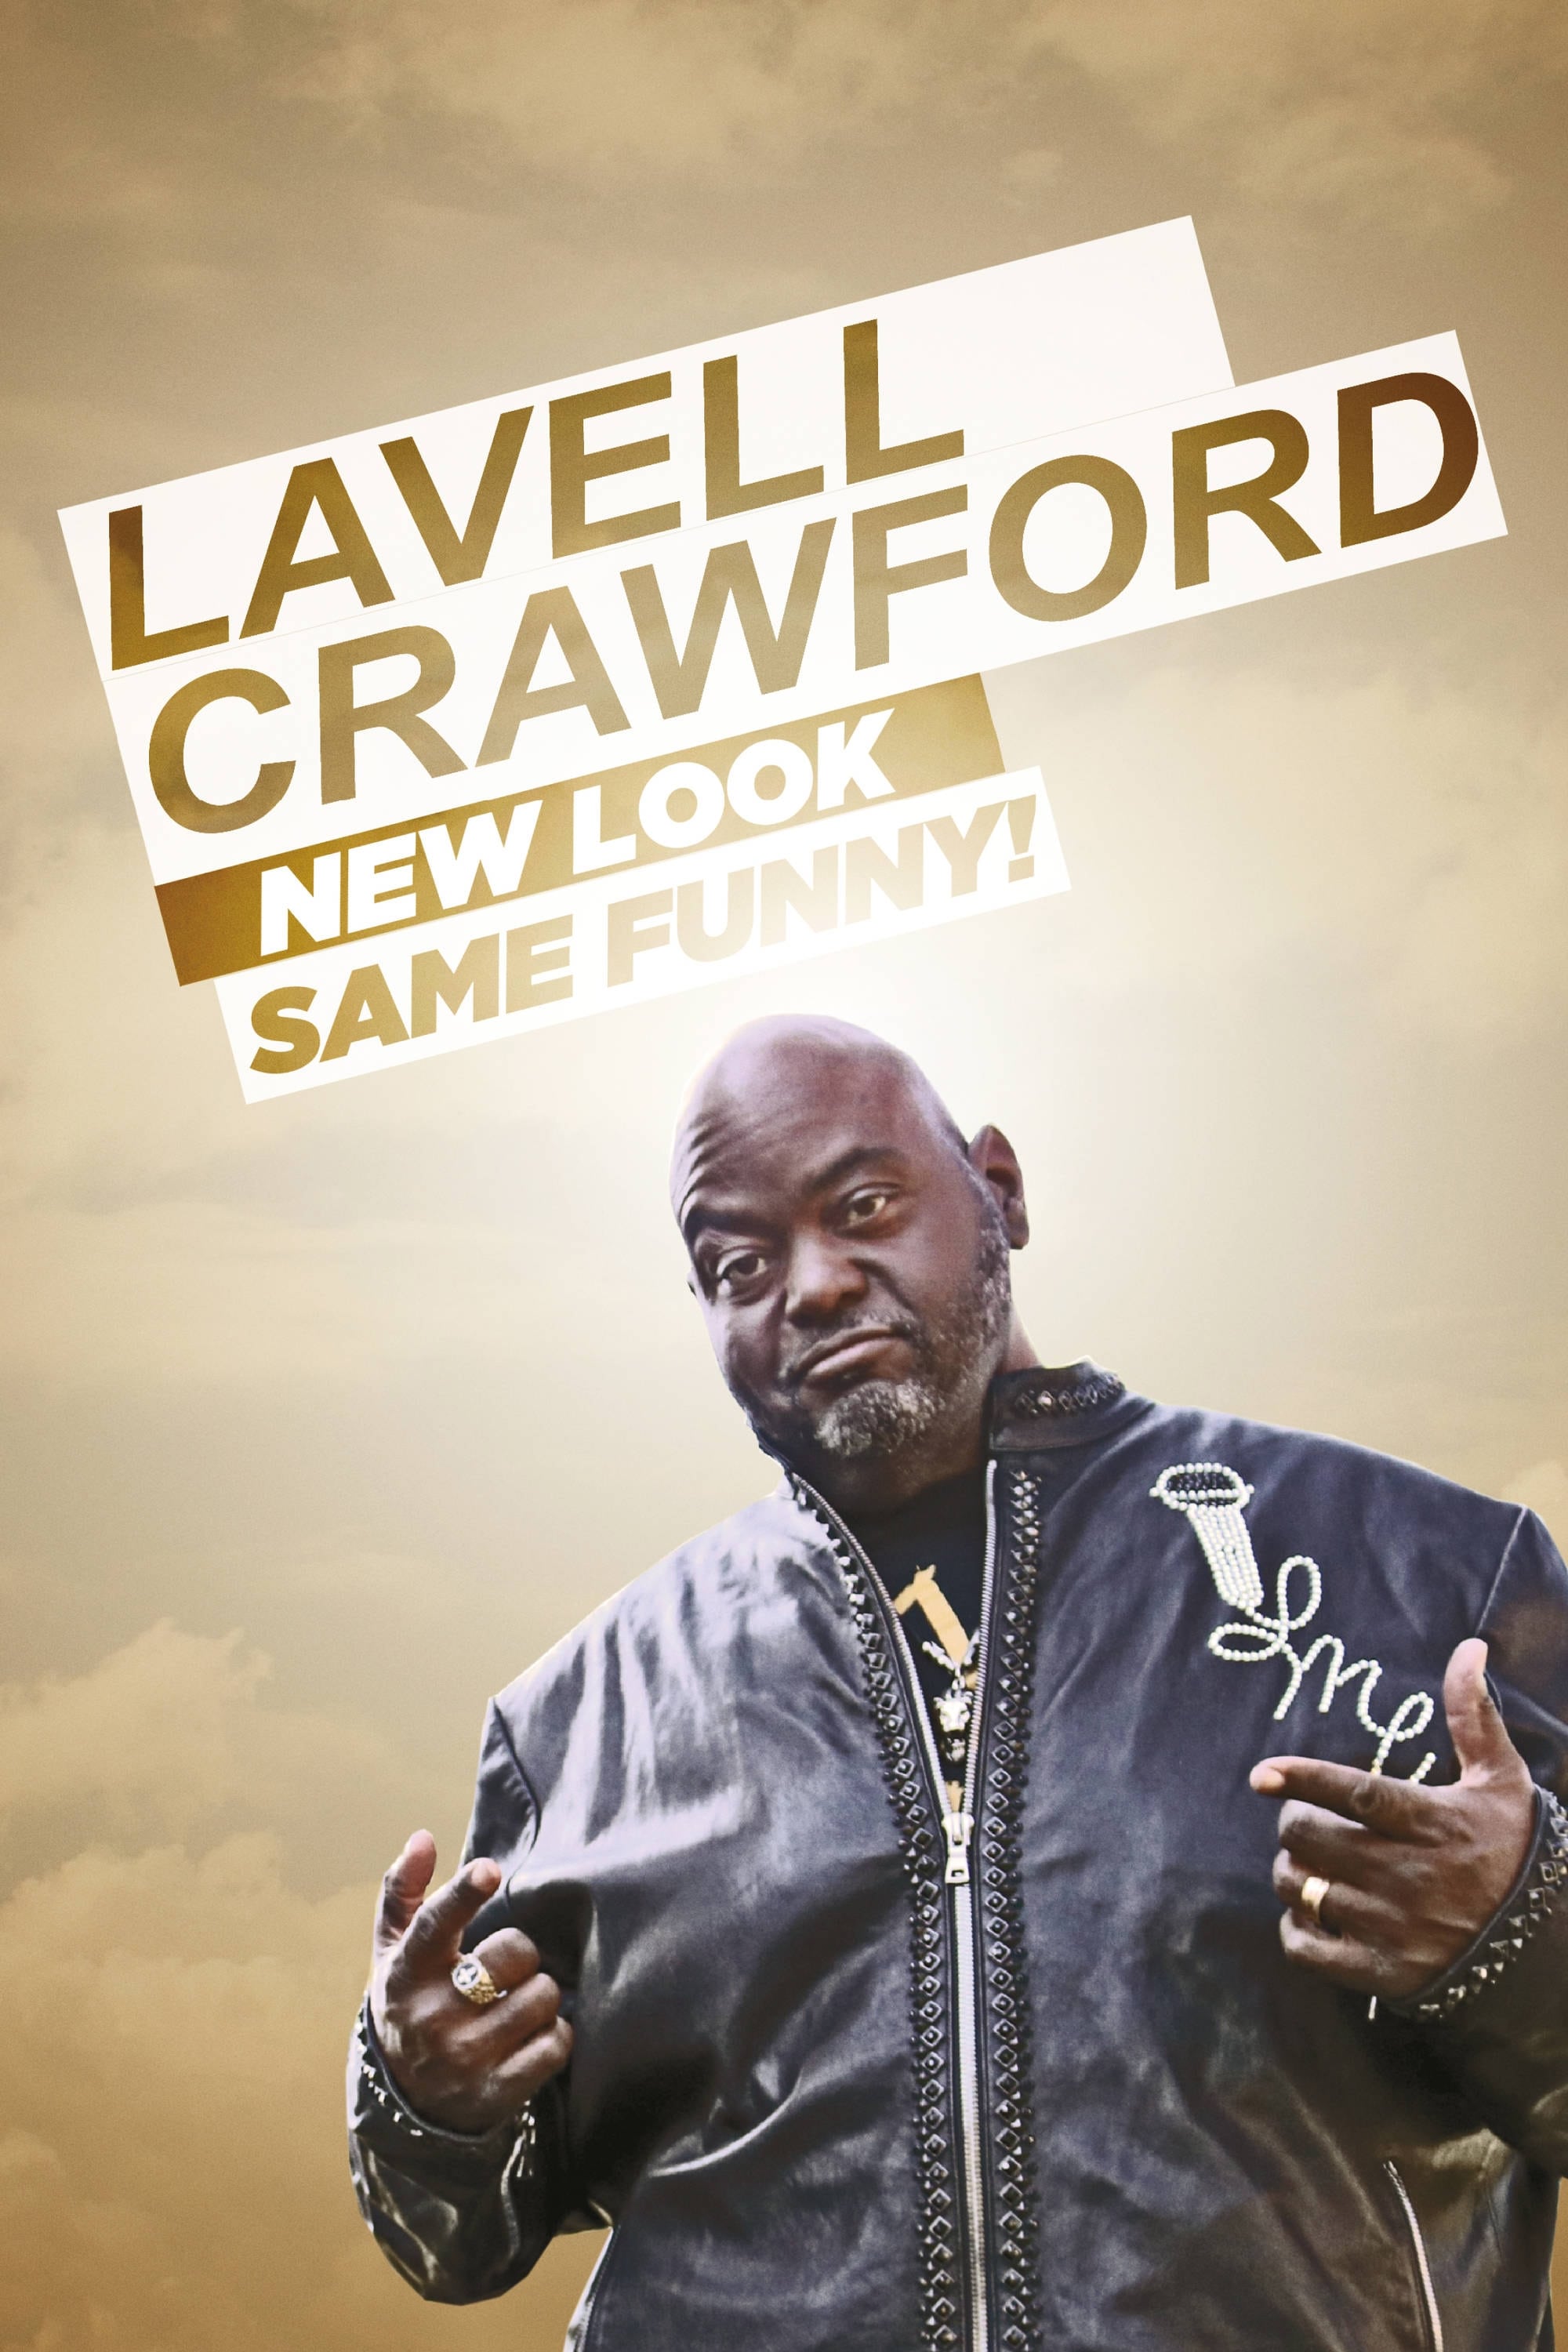 Lavell Crawford: New Look Same Funny!